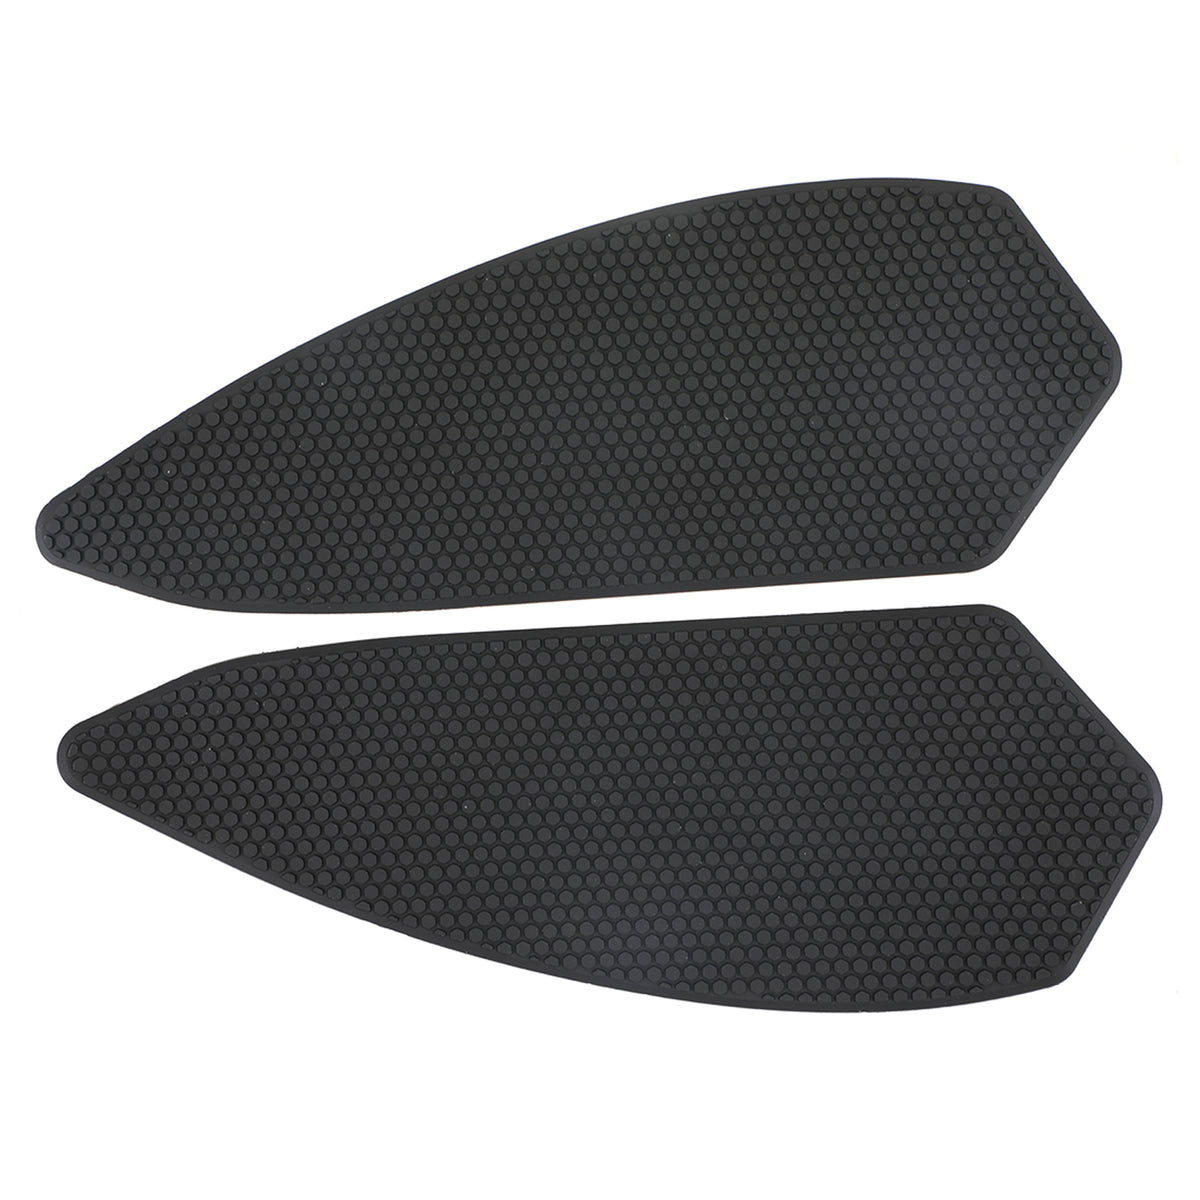 BMW S1000RR 2020+ Tank Traction Grips Boot Guards Side Pads